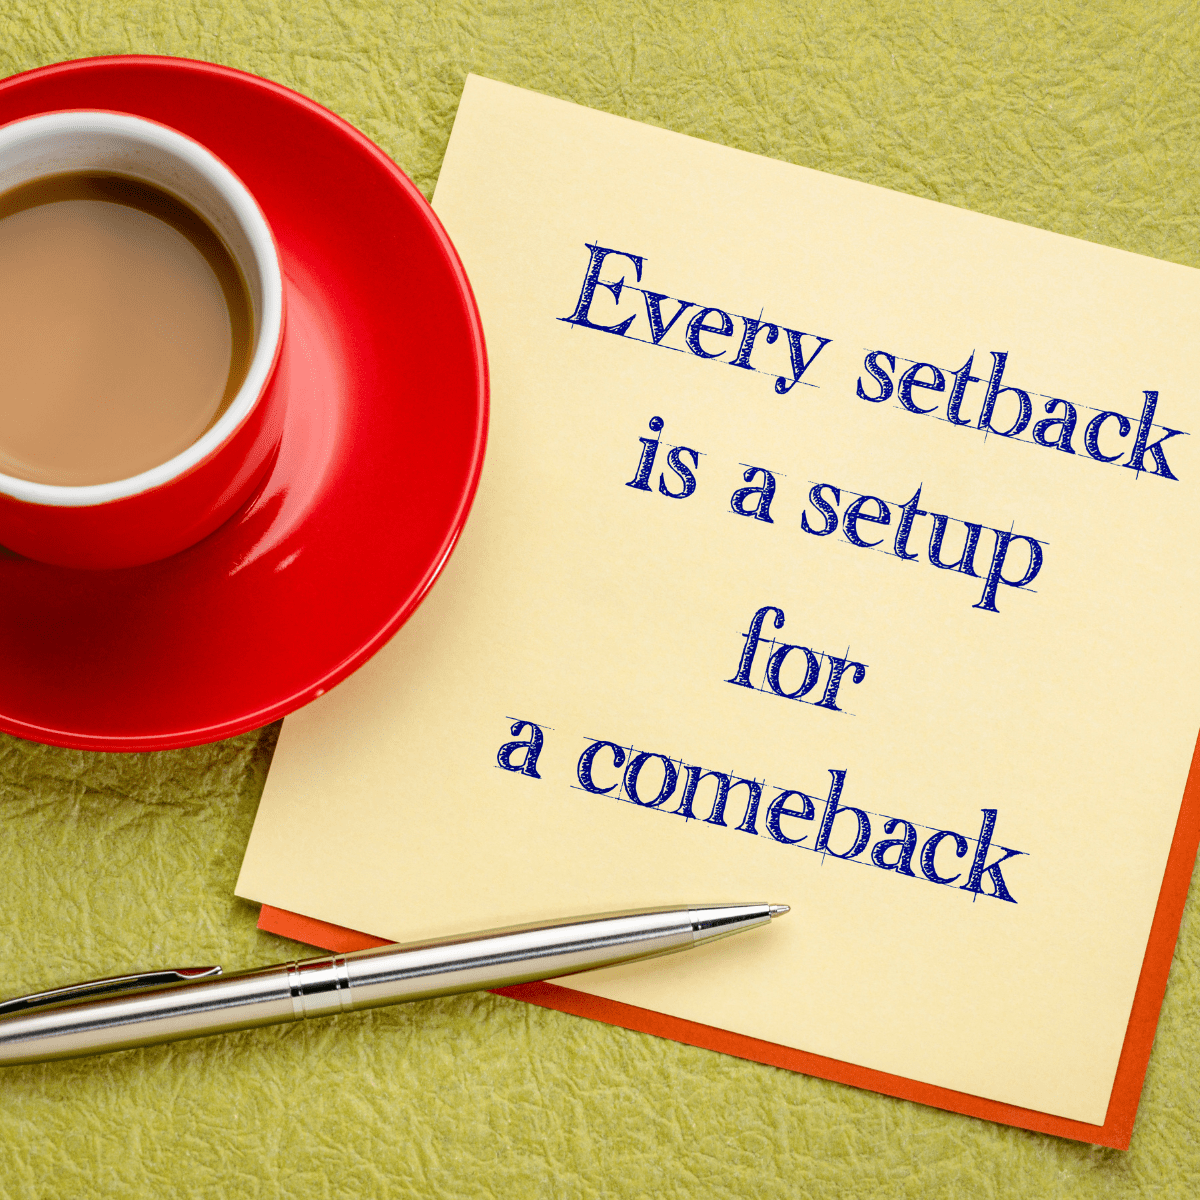 You can come back from a setback.